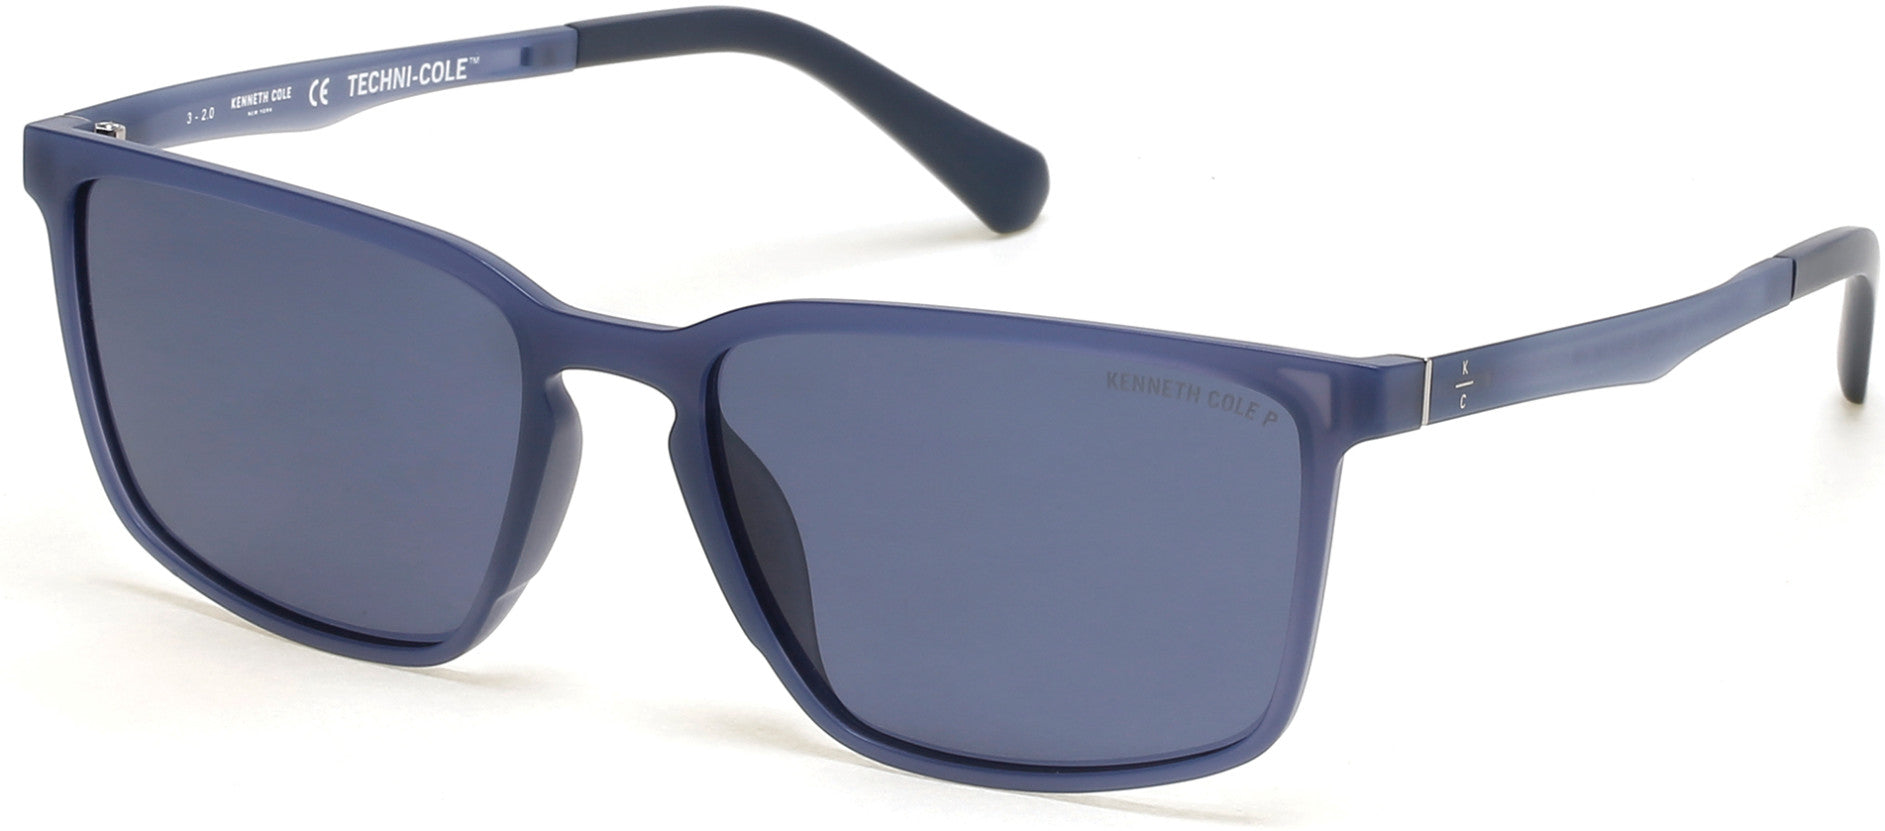 Kenneth Cole New York,Kenneth Cole Reaction KC7251 Square Sunglasses 91D-91D - Matte Blue / Smoke Polarized